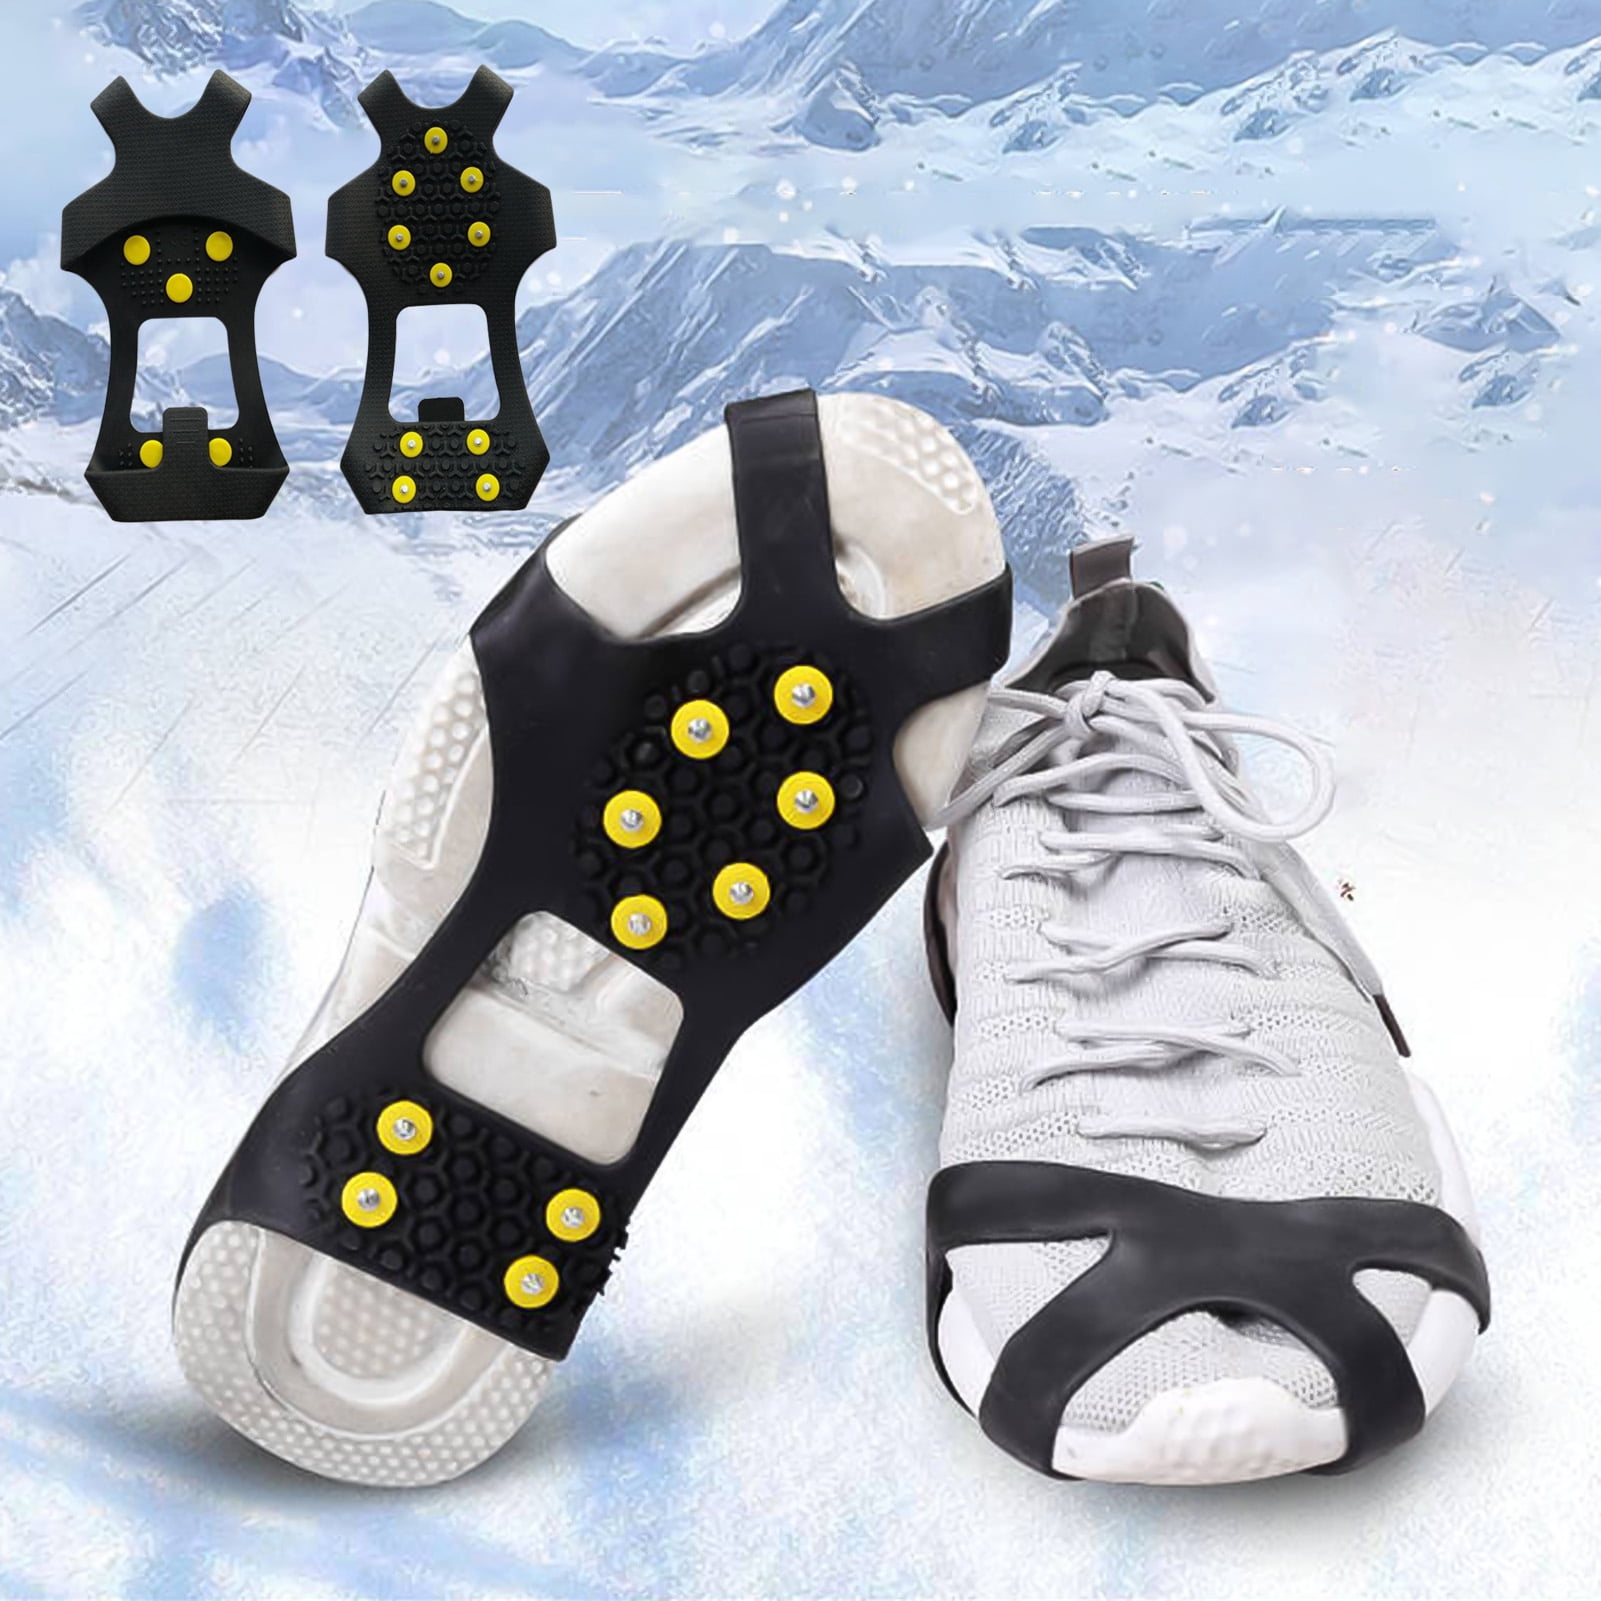 Outdoor 10 Studs Anti Slip Ice Claw Shoe Cover Stretch Resistance Grippers 